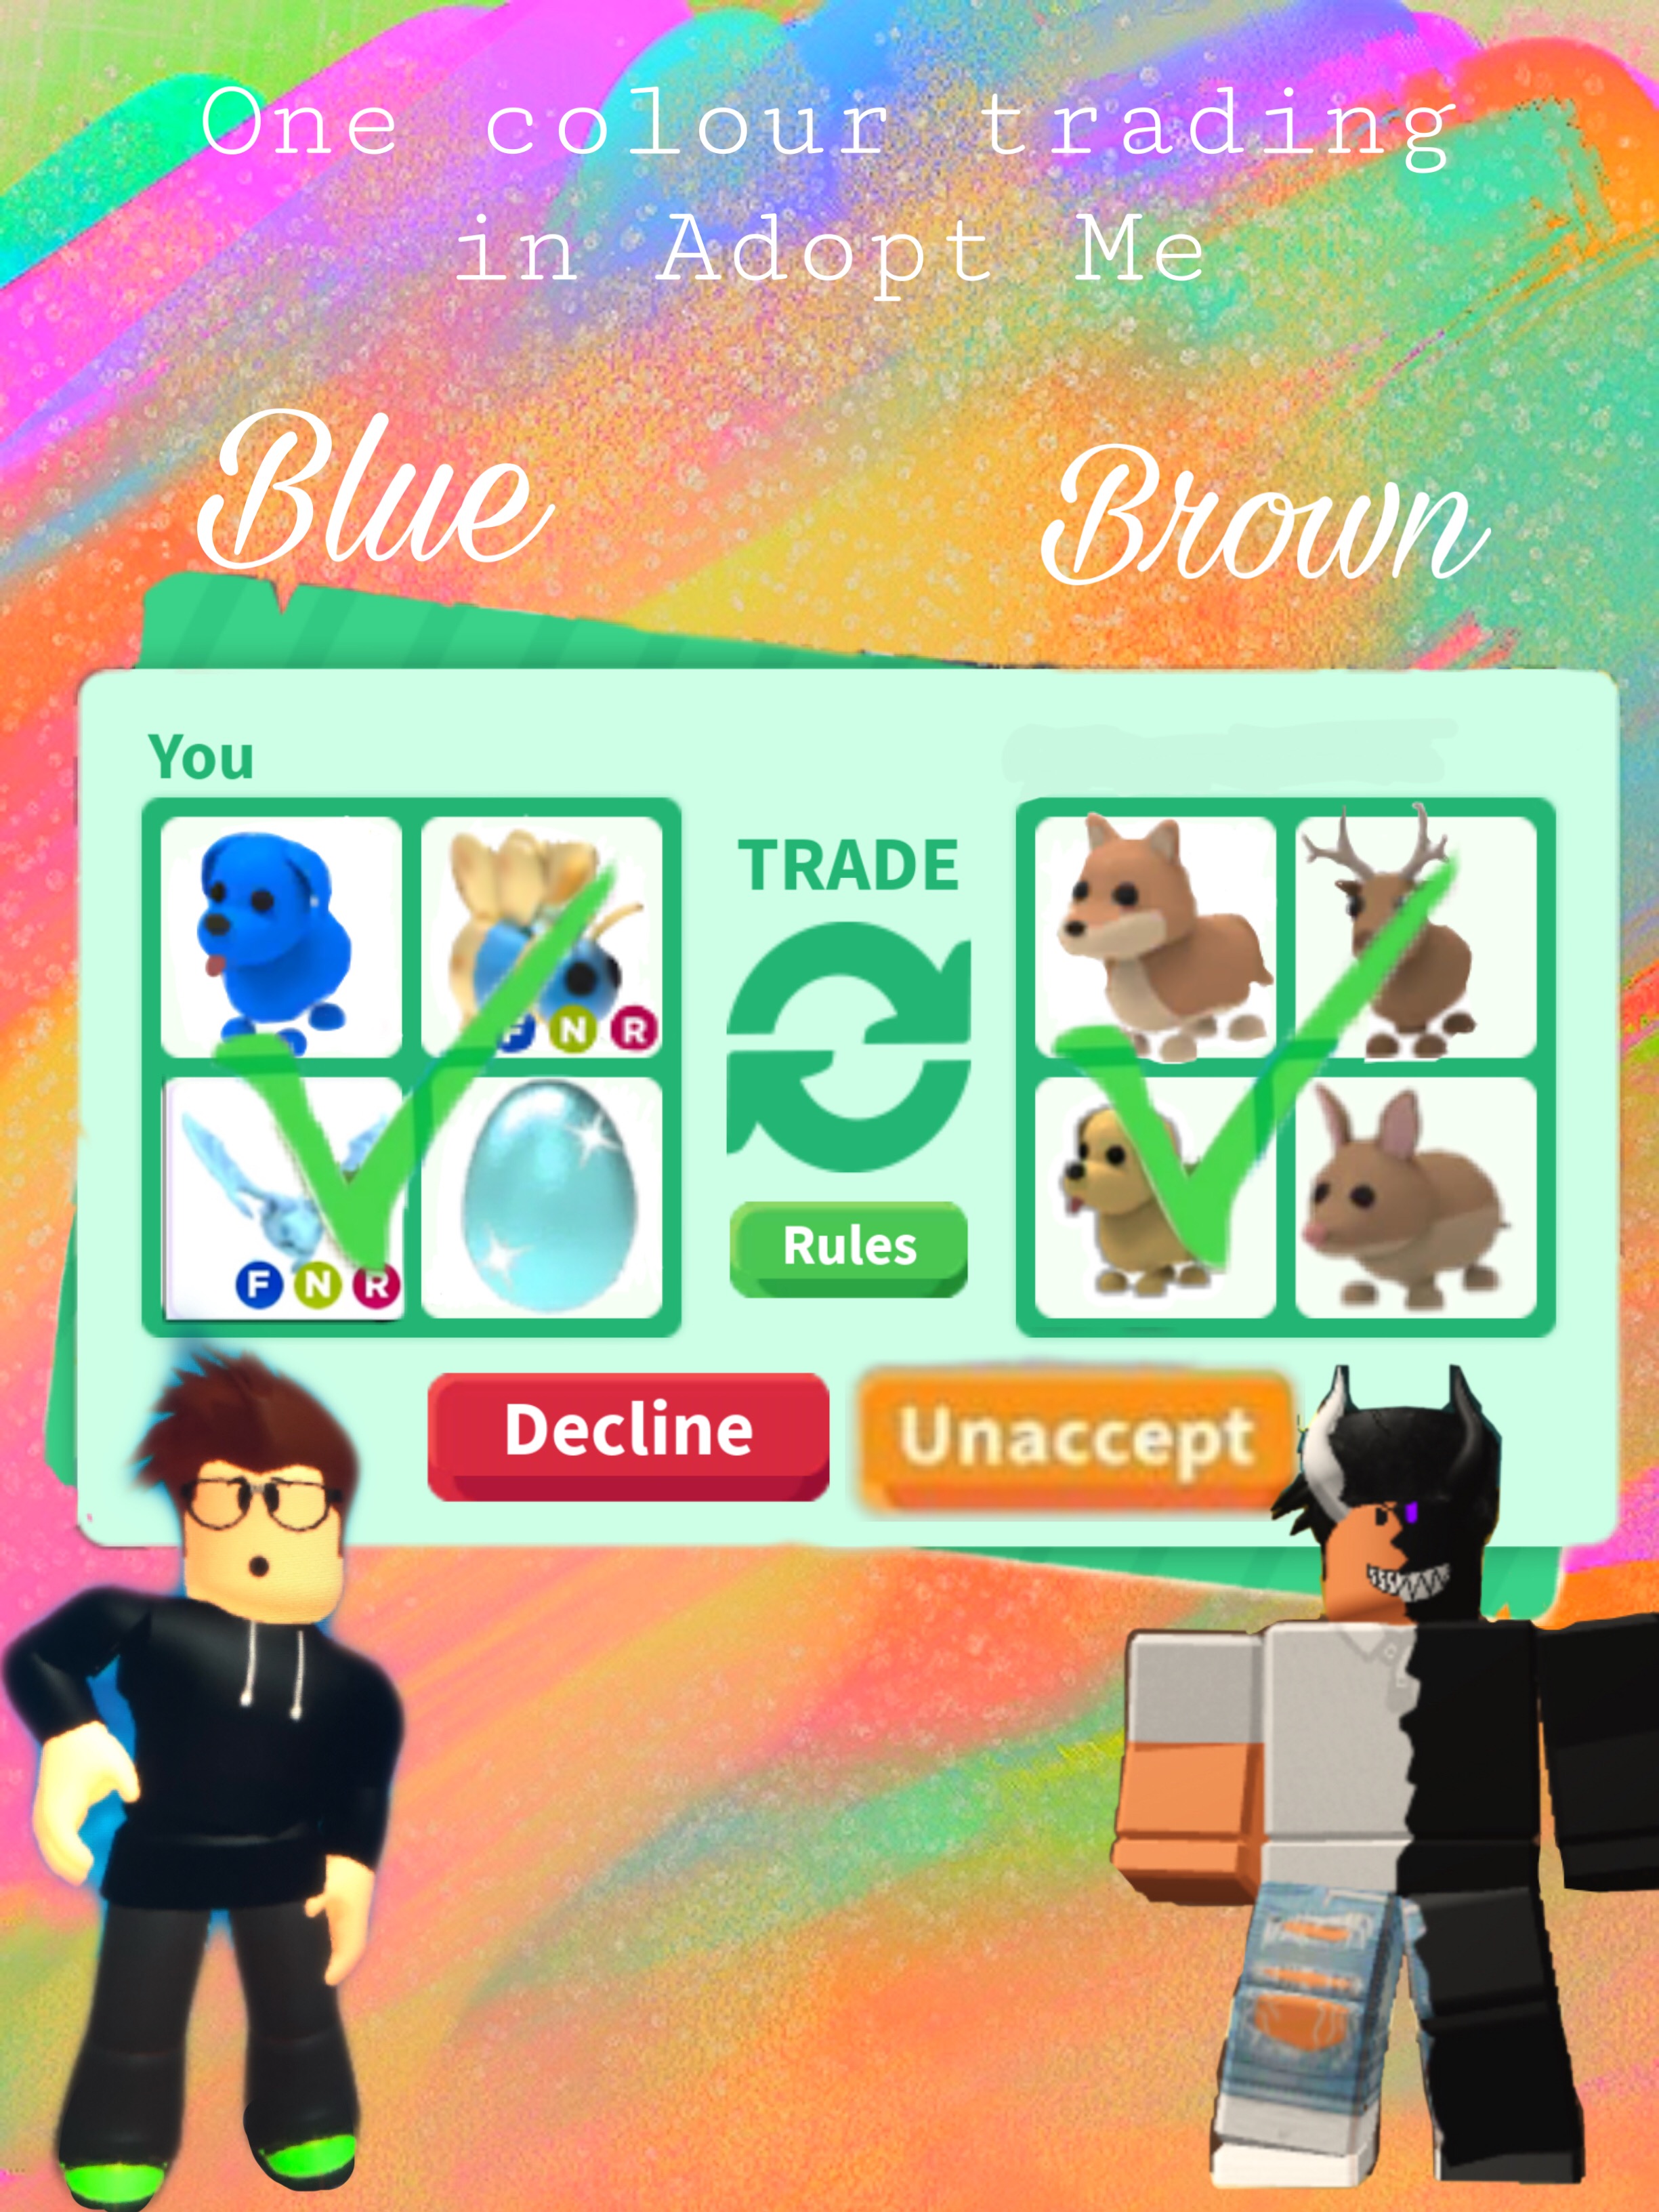 Adoptme Roblox Trading Onecolour Image By Llouisx0